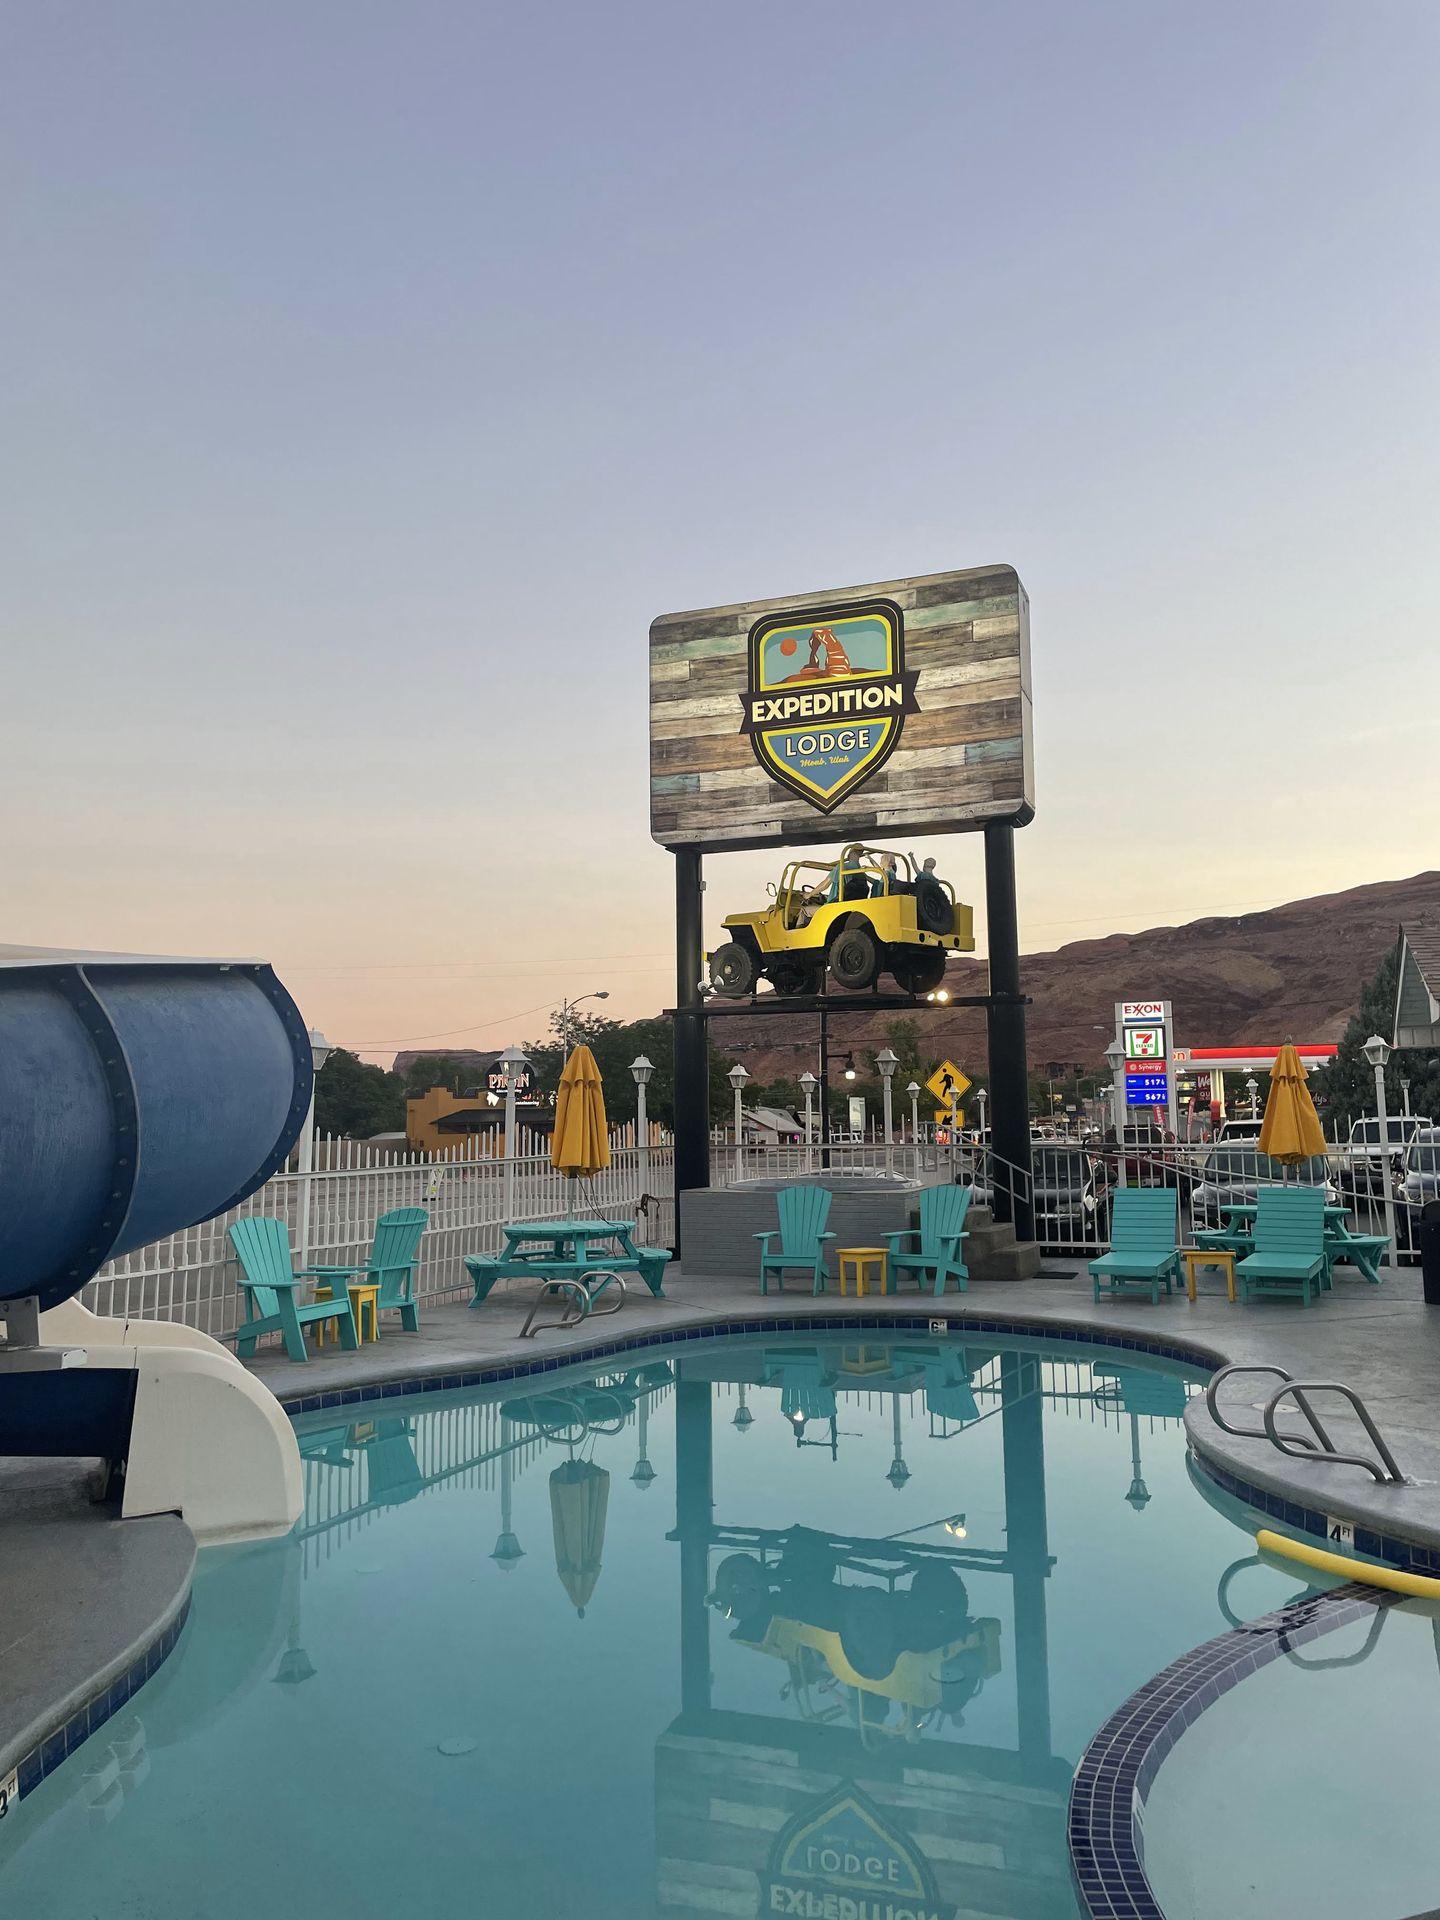 A pool surrounded by blue chairs. In the background, there is a sign for Expedition Lodge with a yellow Jeep up in the air.